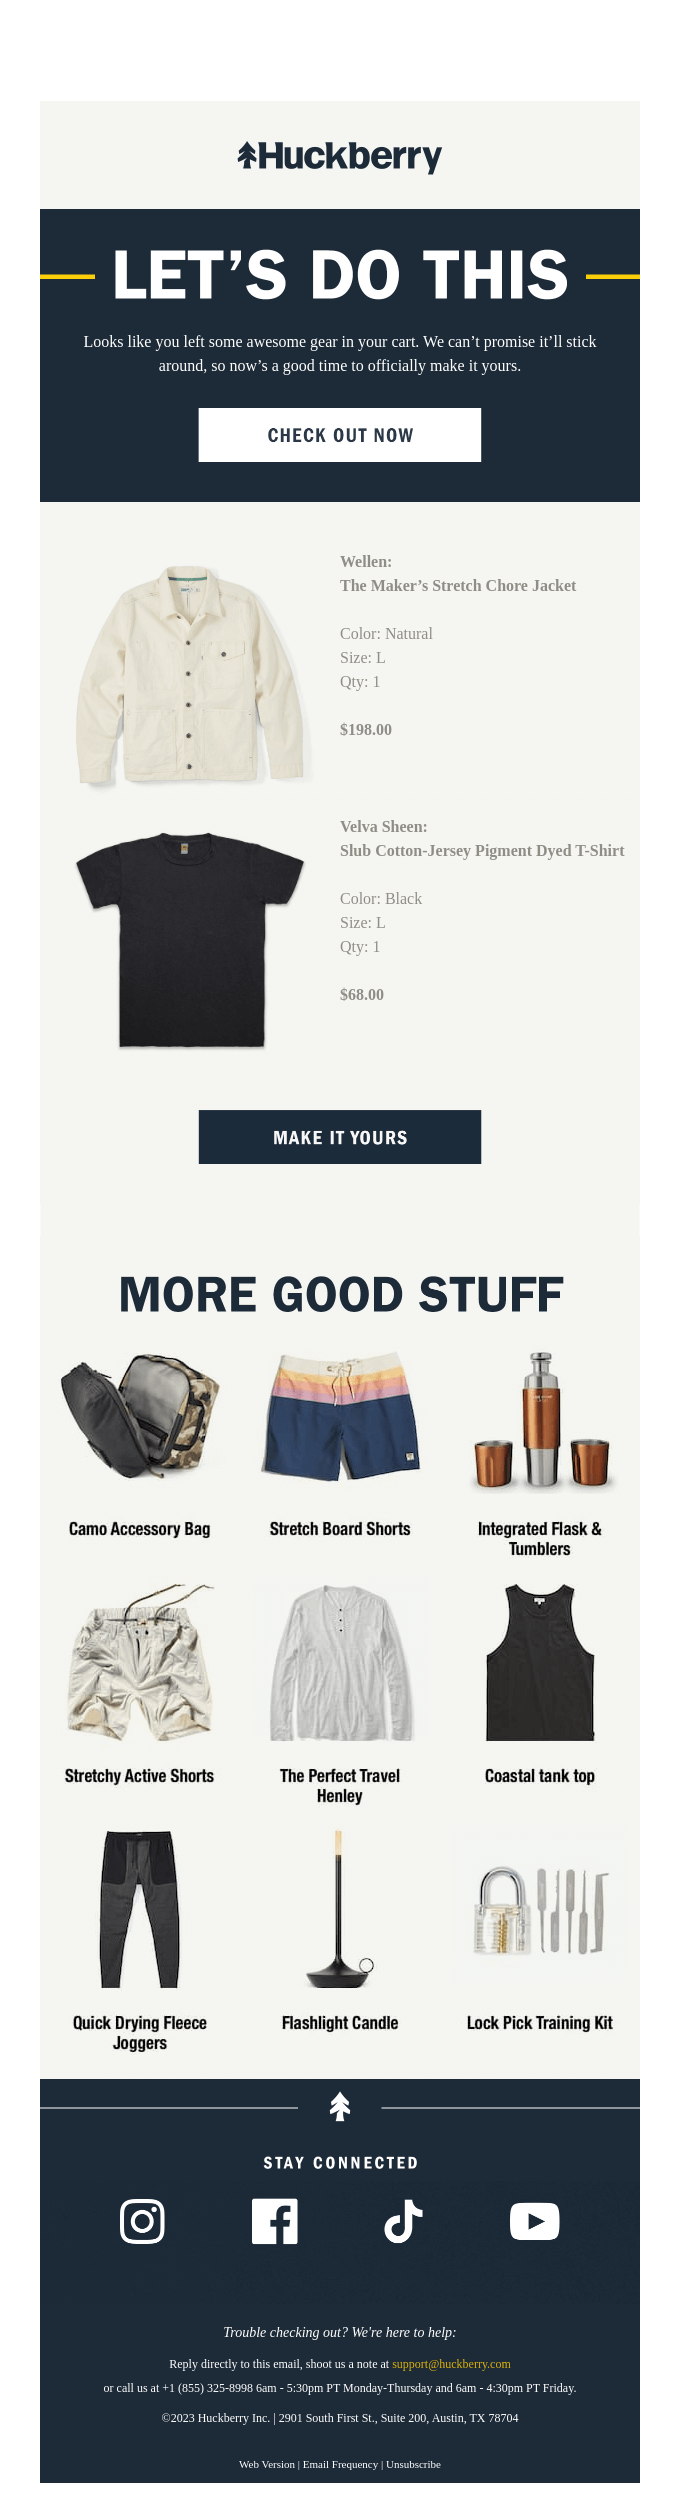 Huckberry_follow-up-email